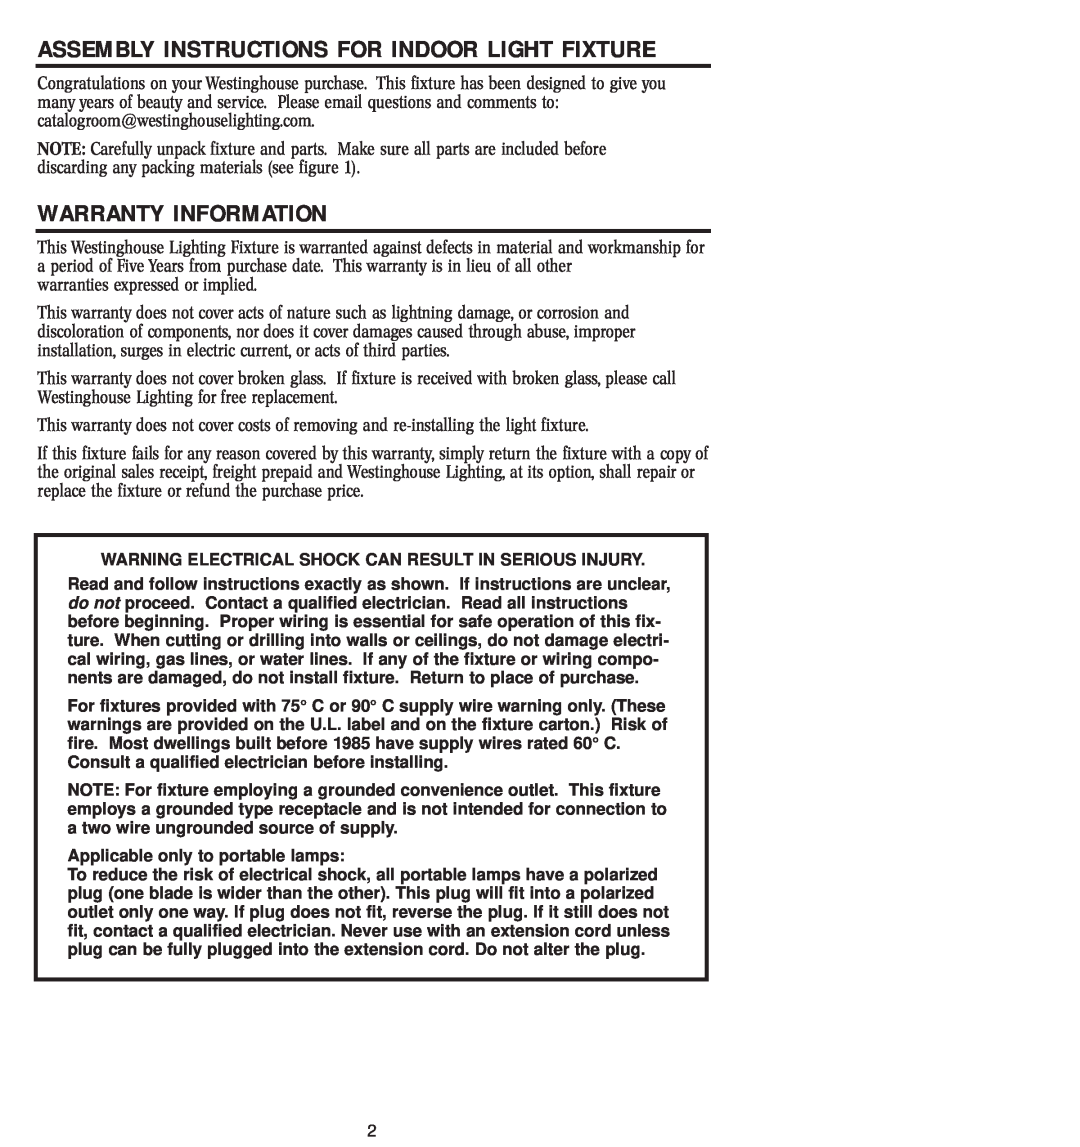 Westinghouse w-025 owner manual Warranty Information, Assembly Instructions For Indoor Light Fixture 